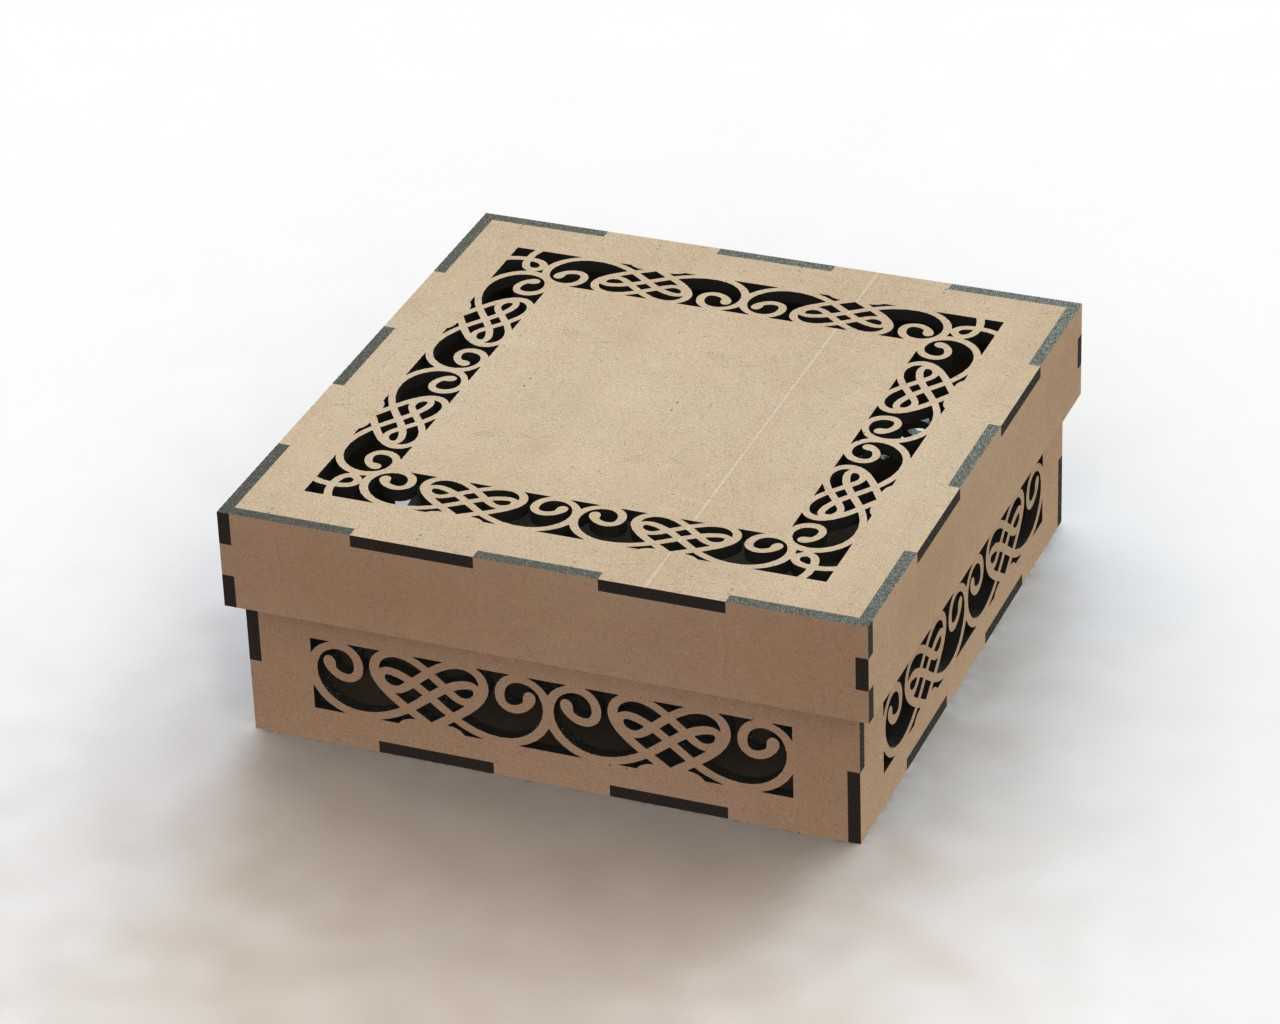 laser-cut-box-with-lid-template-dxf-file-free-download-3axis-co